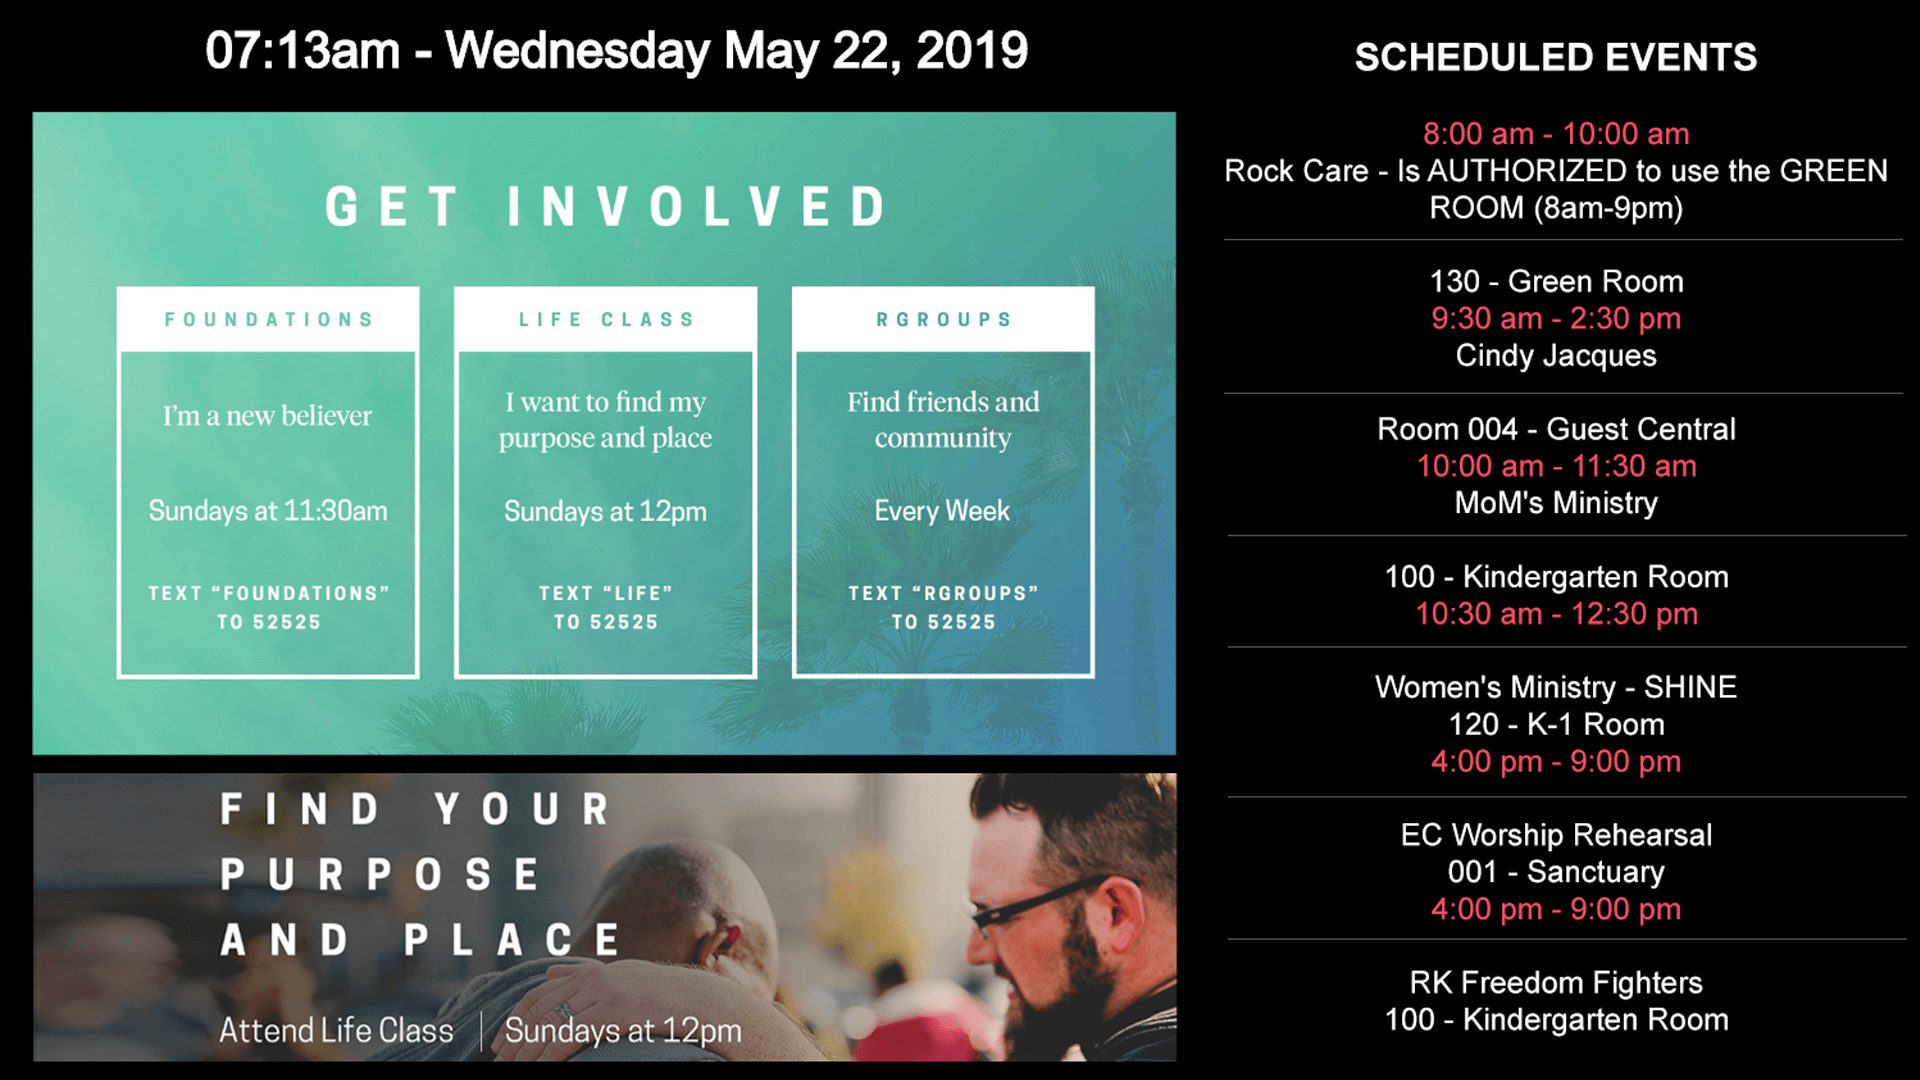 Dark digital signage displaying event schedule, chruch messaging, and ways to get involved for Rock Church